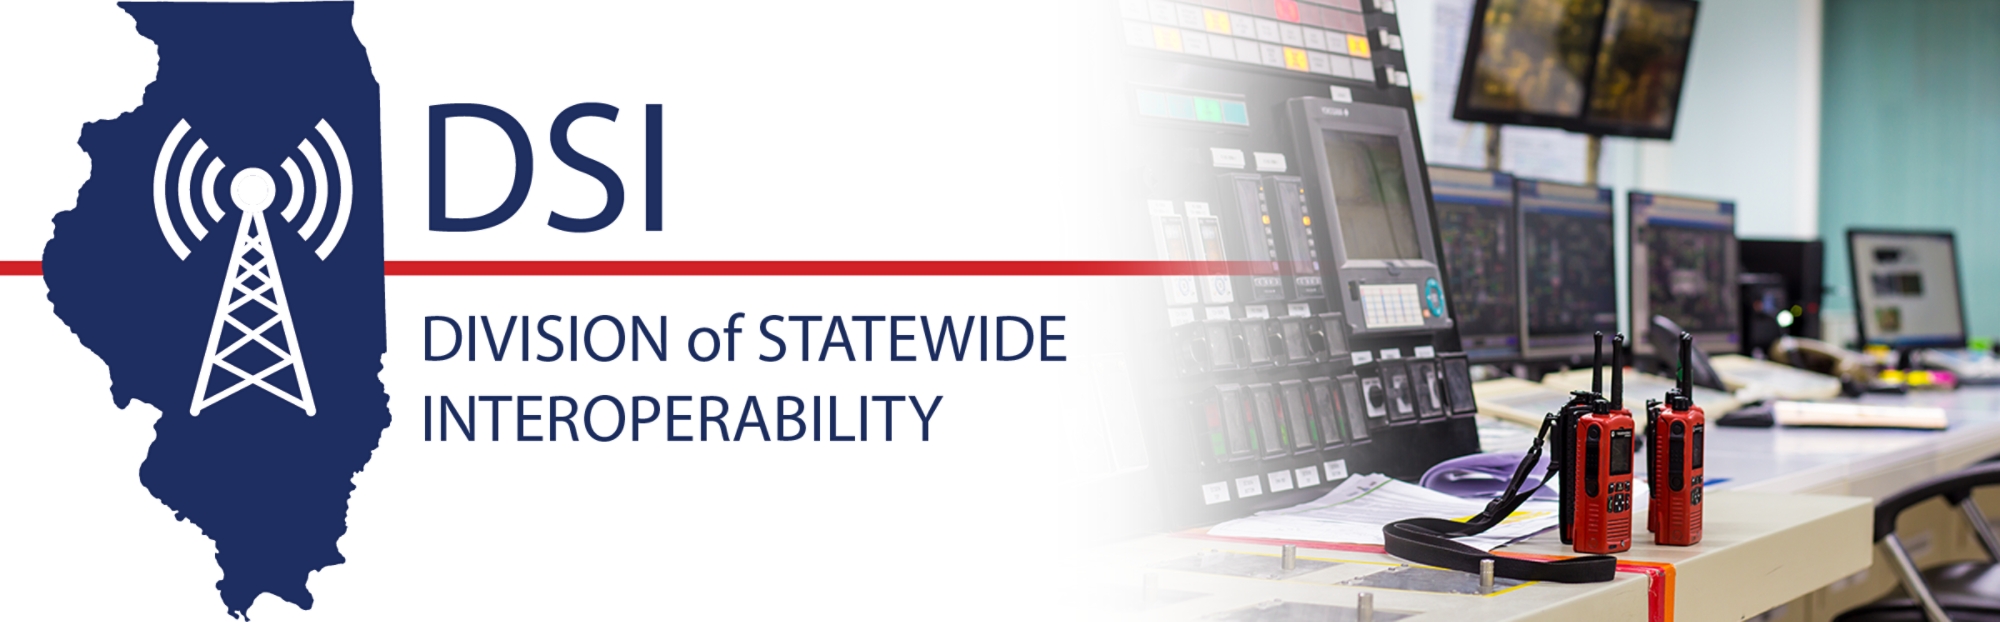 Division of Statewide Interoperability